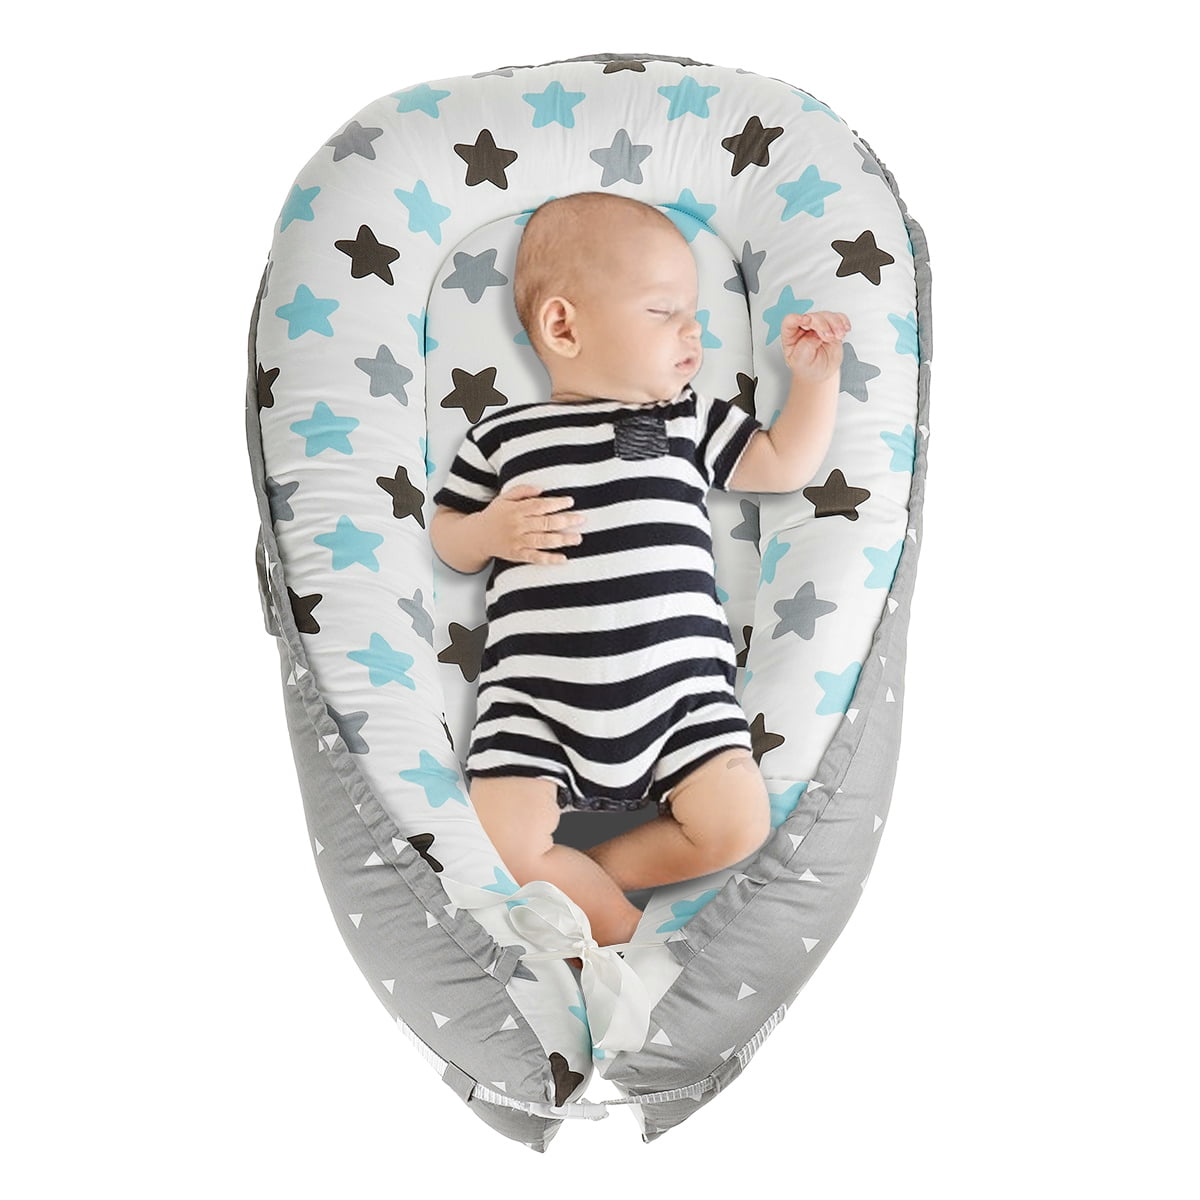 Machine Washable Newborn Sleeping Bed Suit for 0-12 Months Baby Lounger Baby Nest for Co-Sleeping Animal Breathable Portable Infant Crib Nest with Soft Material and Waterproof Bumper 